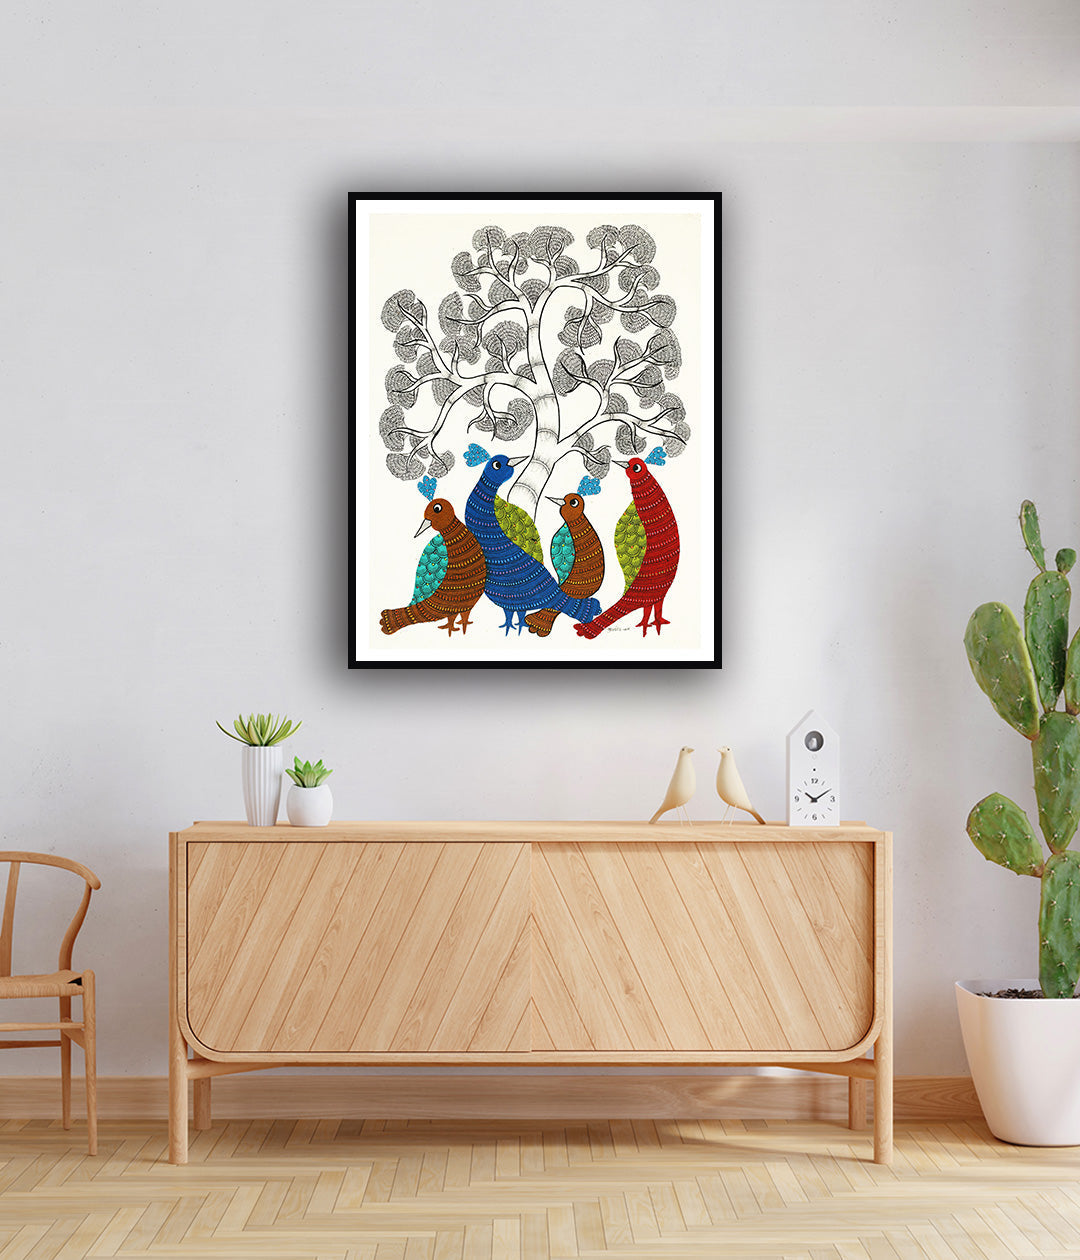 Family Ties Gond Art Painting For Home Wall Art Decor